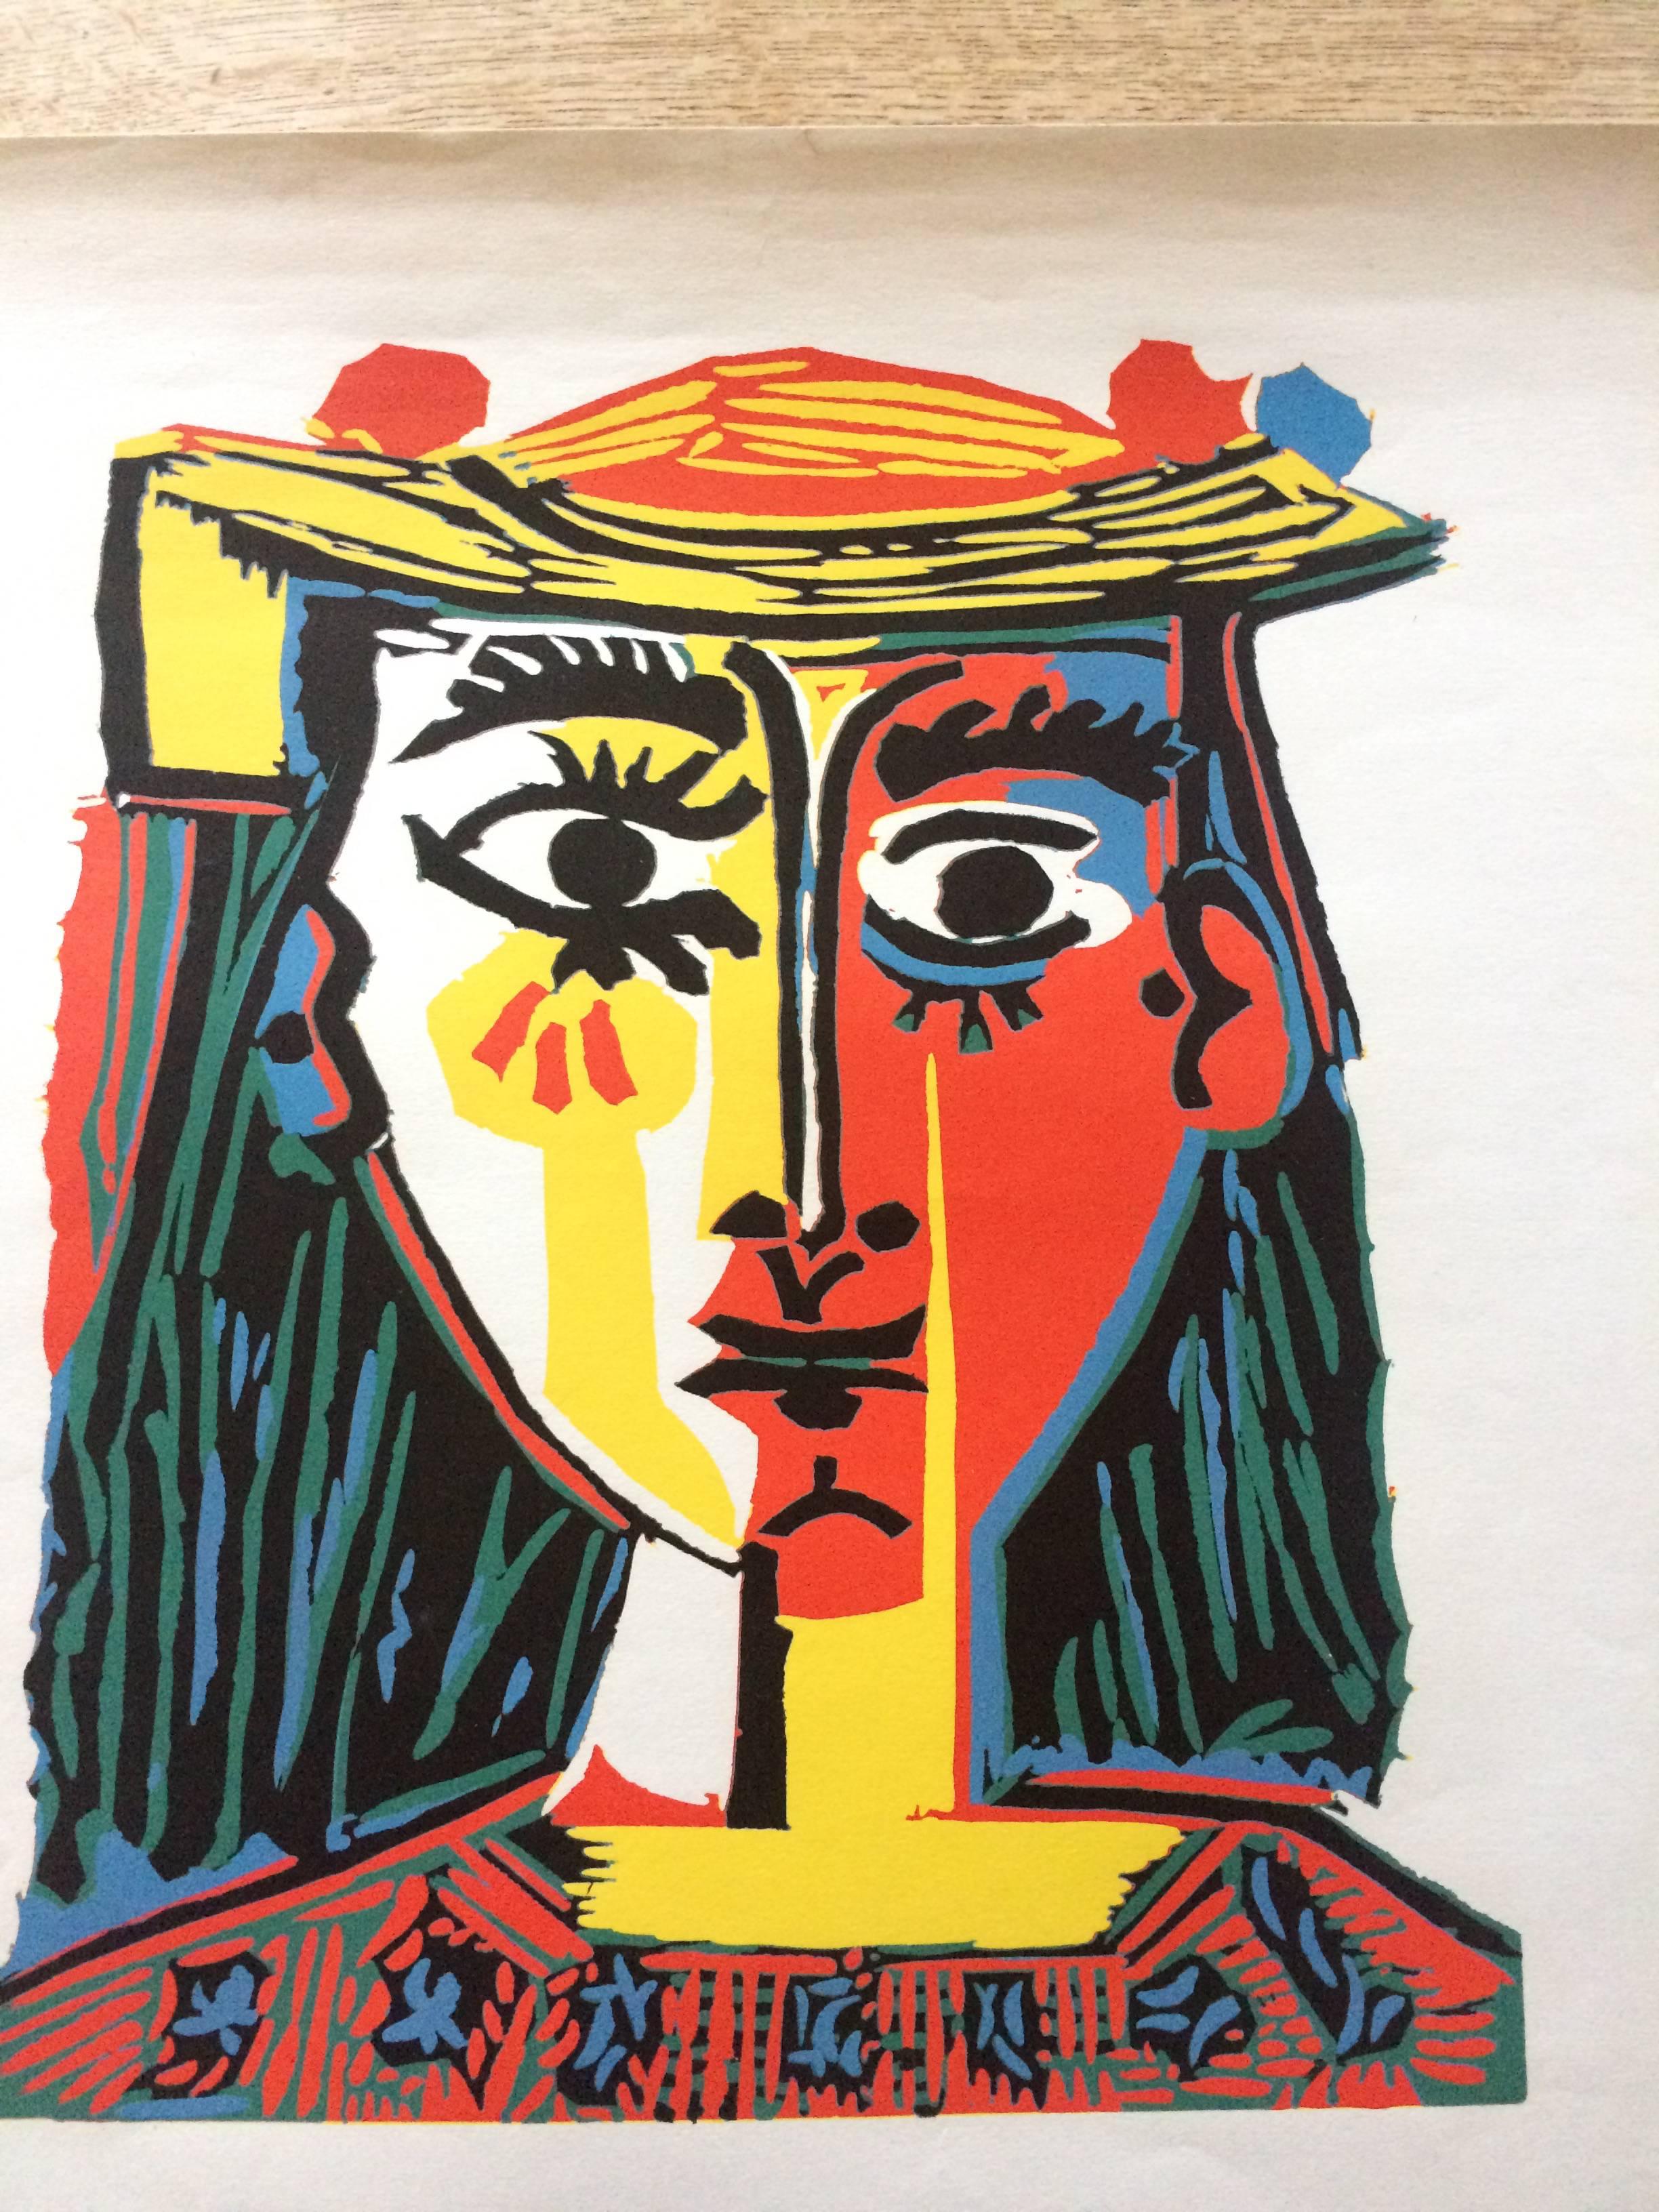 Pressed Exhibition poster ‘Linogravures de Picasso’ after Pablo Picasso, 1972 For Sale